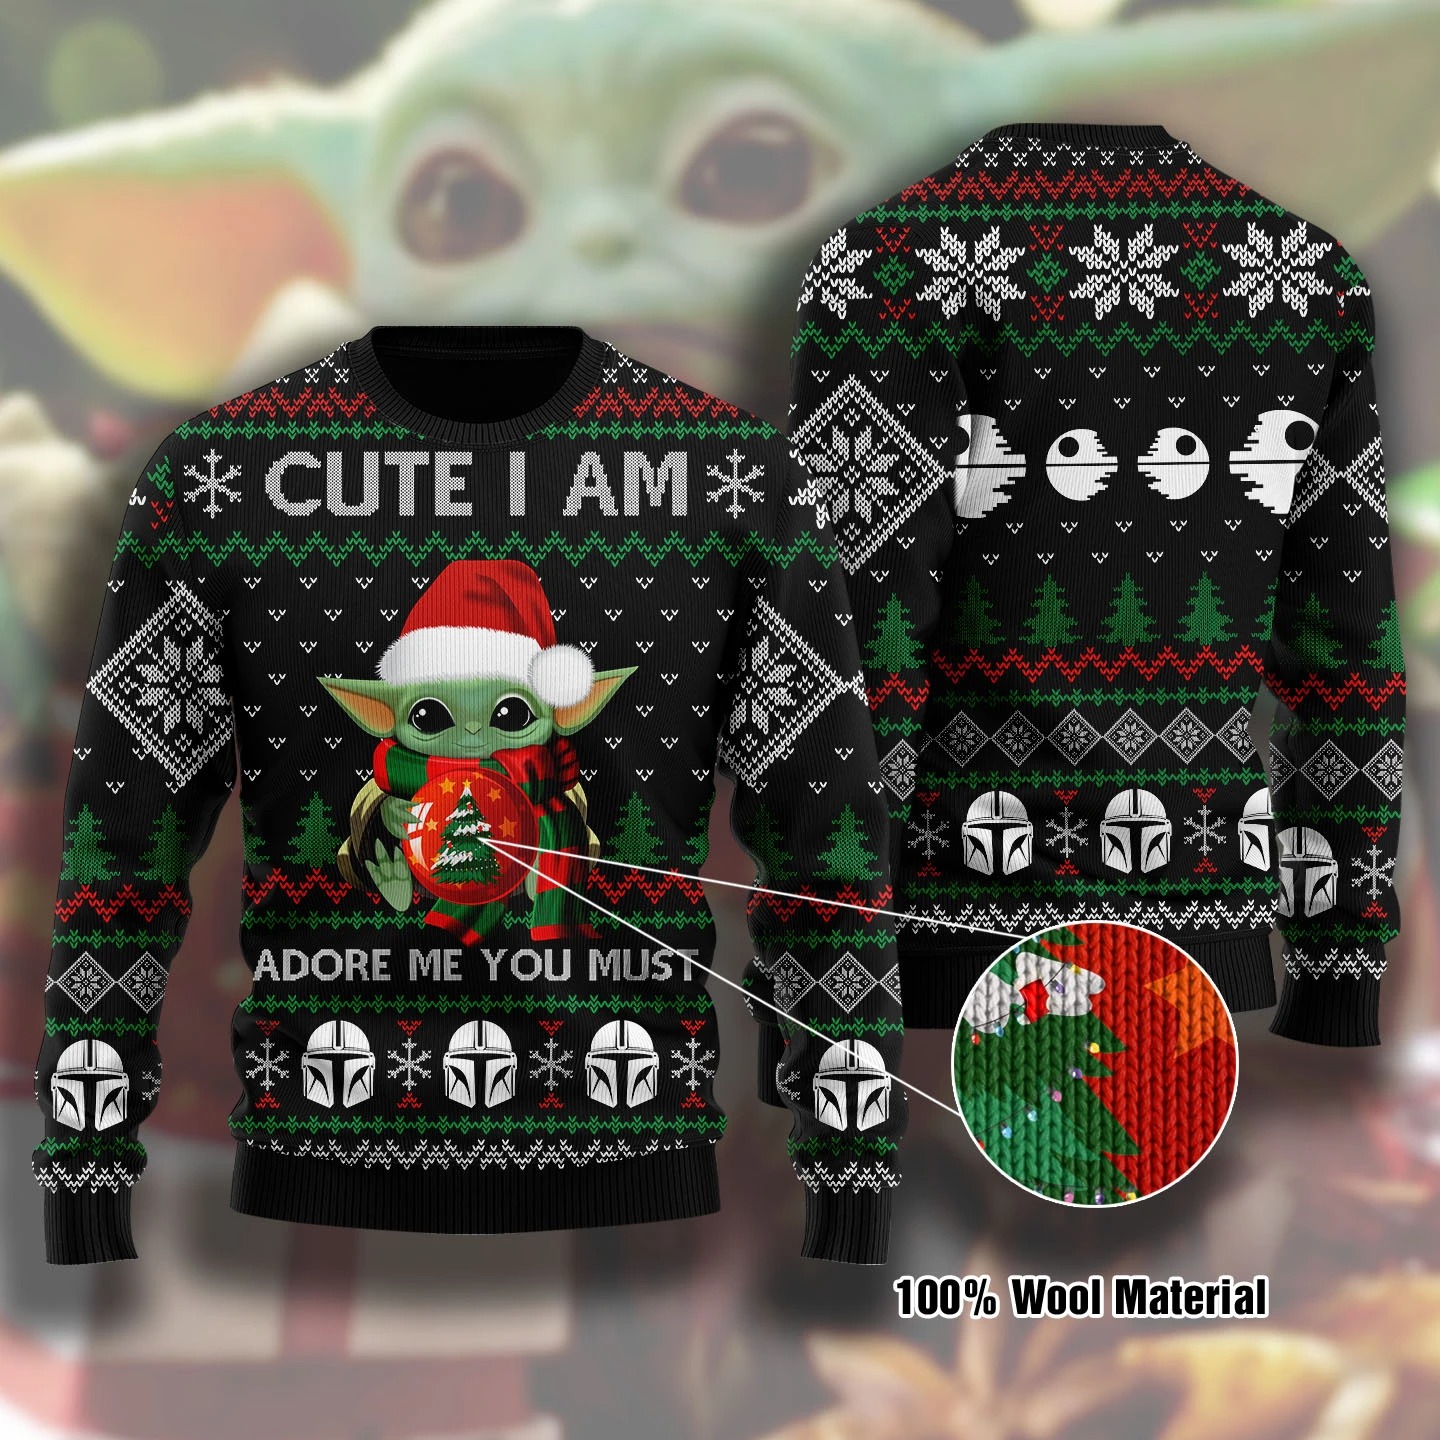 Baby yoda cute I am ugly Christmas sweater – LIMITED EDITION